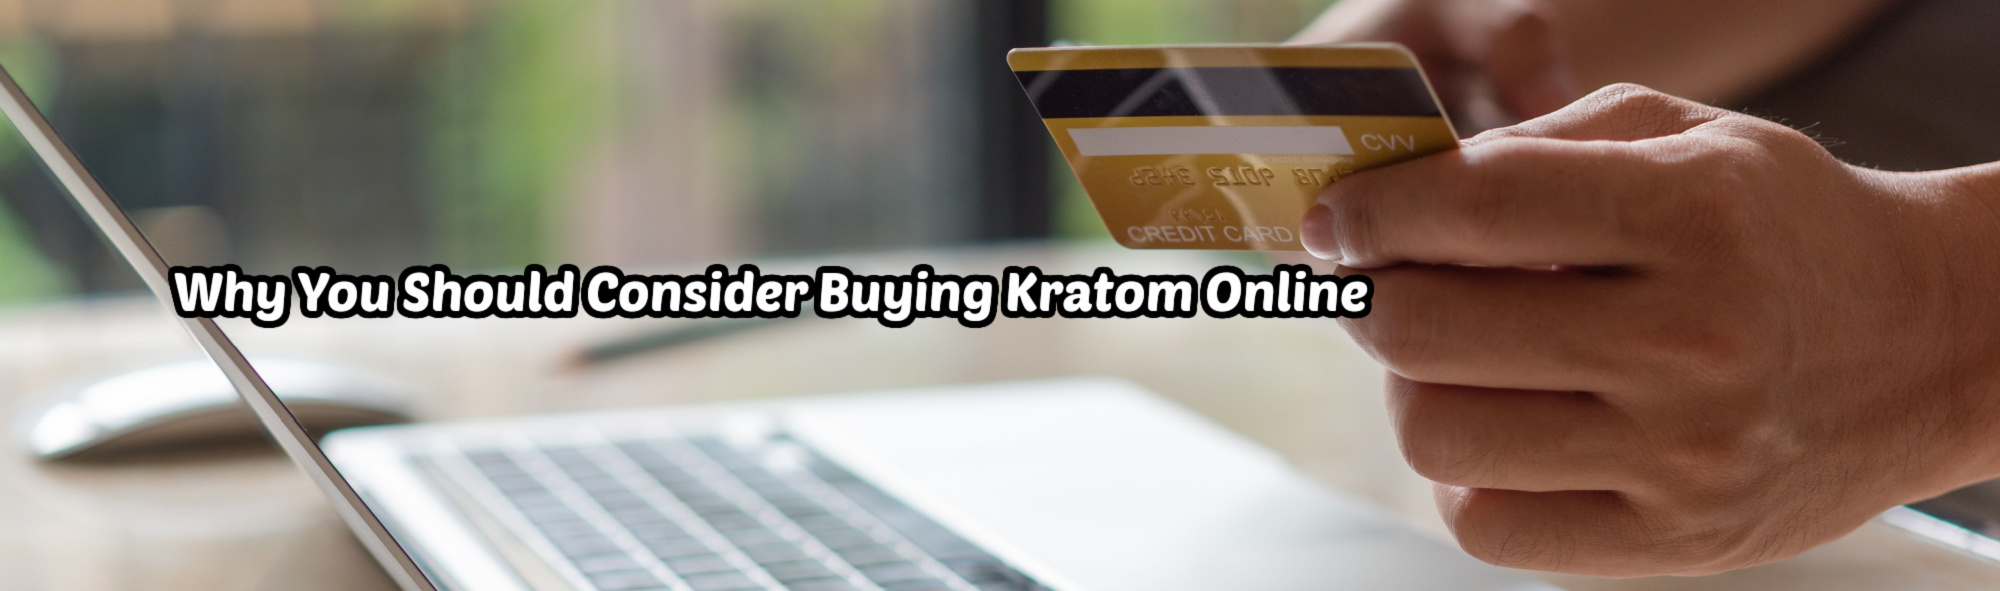 image of why you should consider buying kratom online